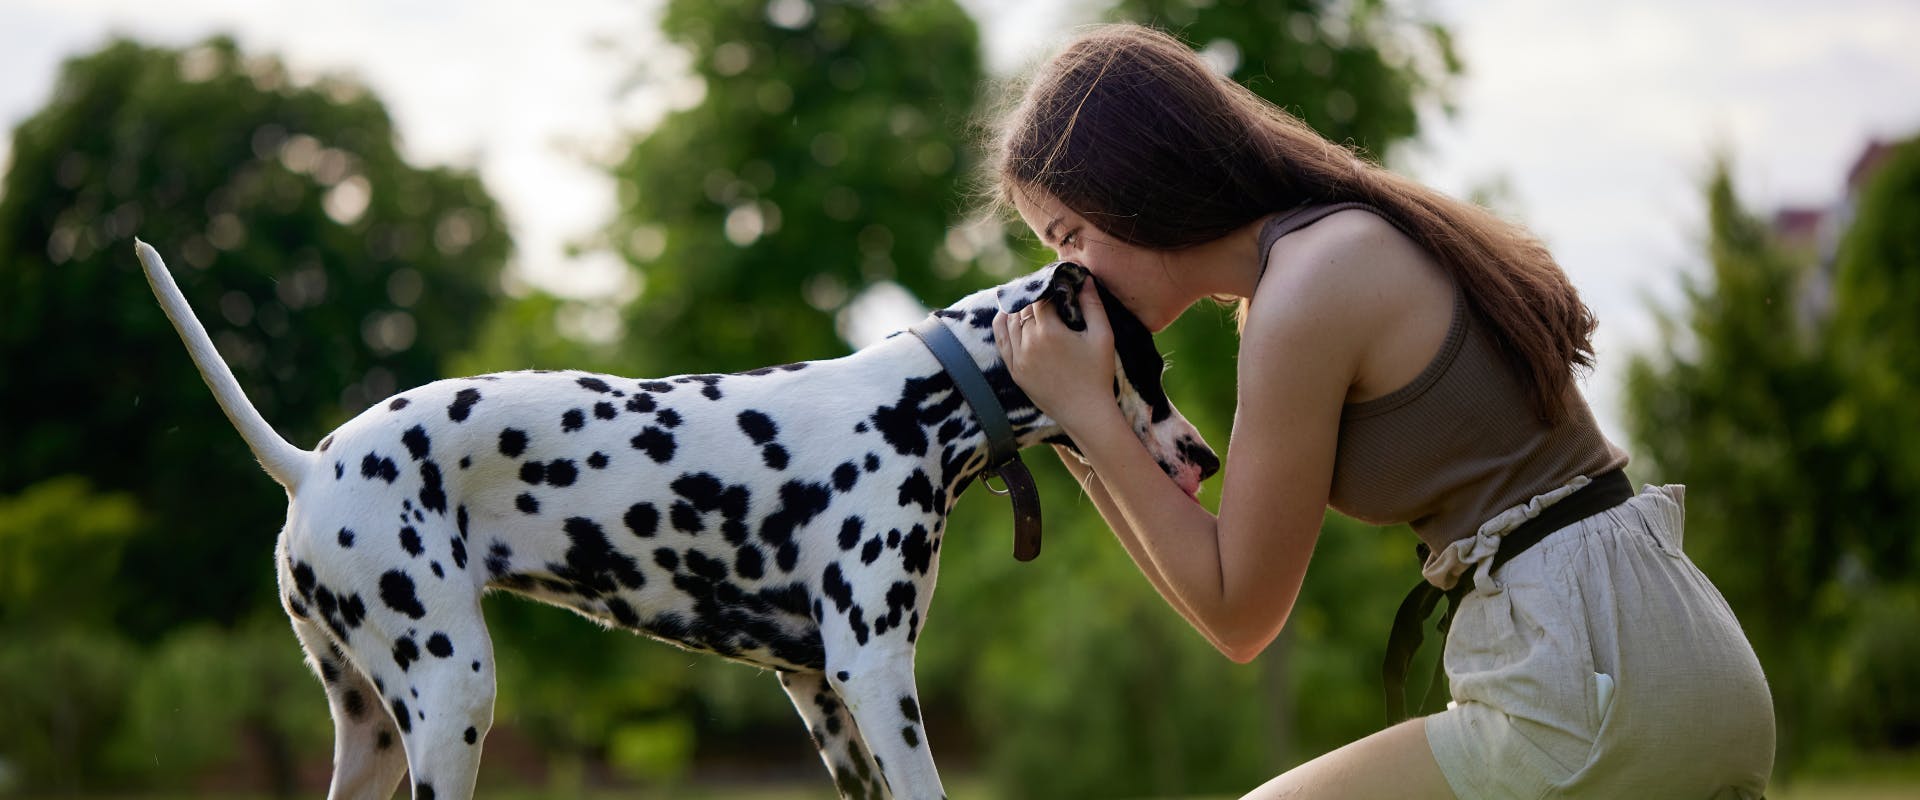 dalmation puppy being kissed by a woman in a park